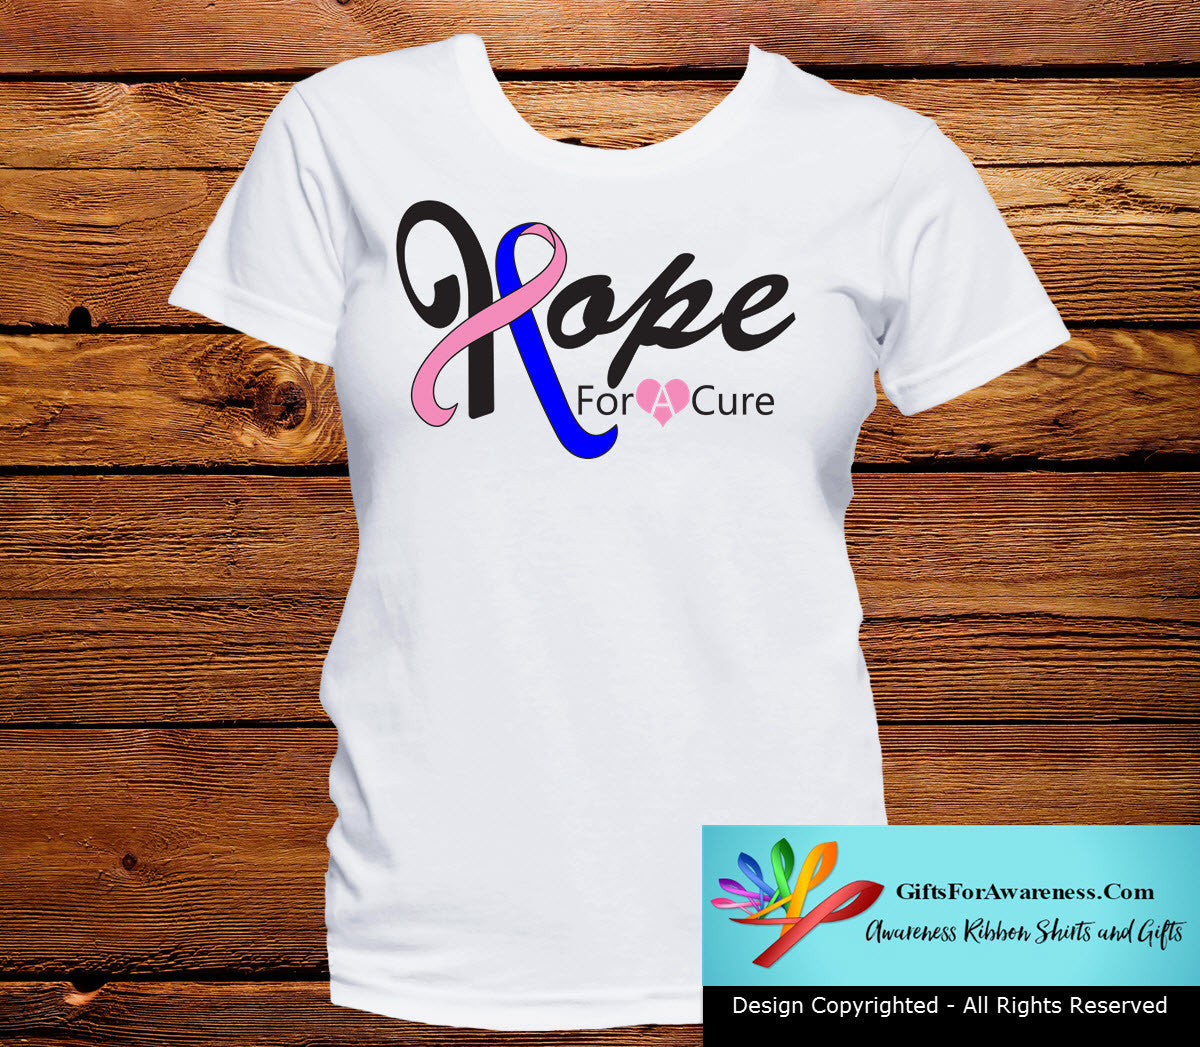 Male Breast Cancer Hope For A Cure Shirts - GiftsForAwareness